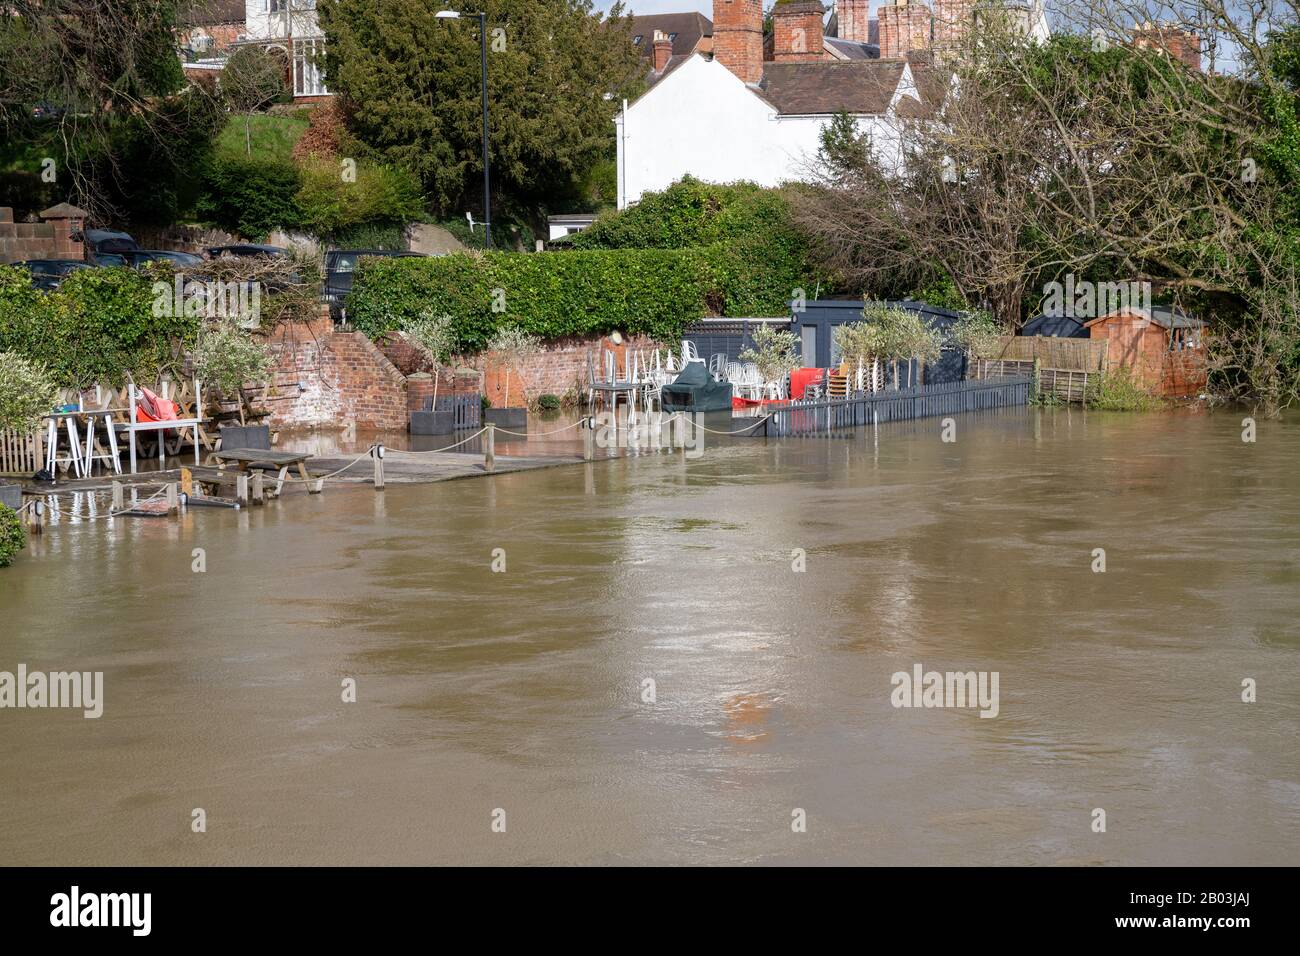 Flooding of the River Severn in Shrewsbury, UK. Flooding the Quarry Park , a children's play area and The Boathouse Pub. Stock Photo